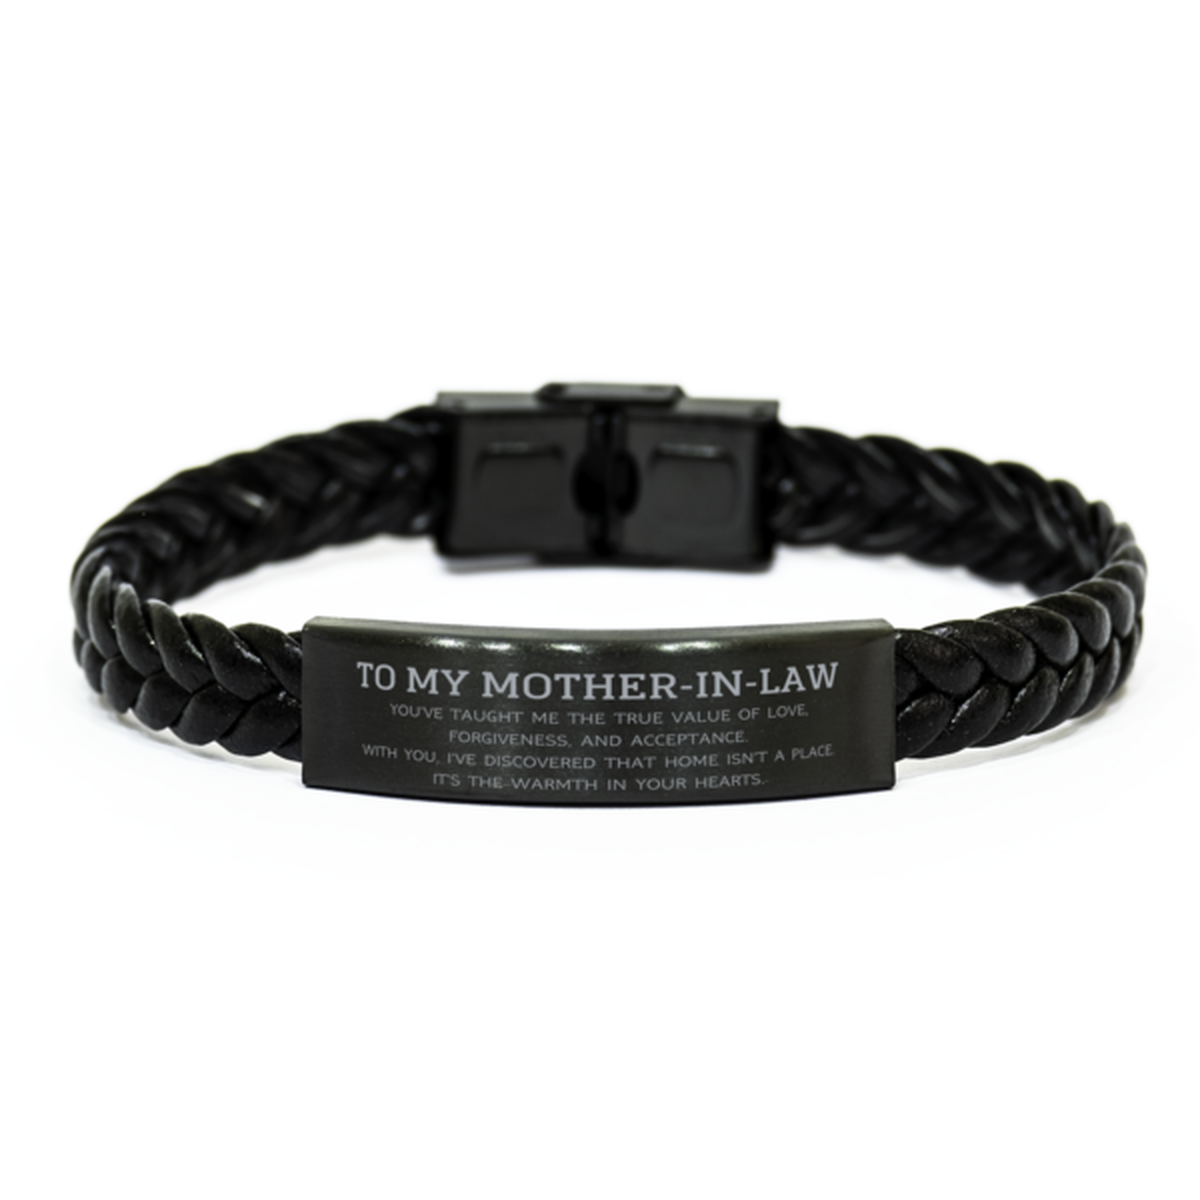 To My Mother-In-Law Gifts, You've taught me the true value of love, Thank You Gifts For Mother-In-Law, Birthday Braided Leather Bracelet For Mother-In-Law